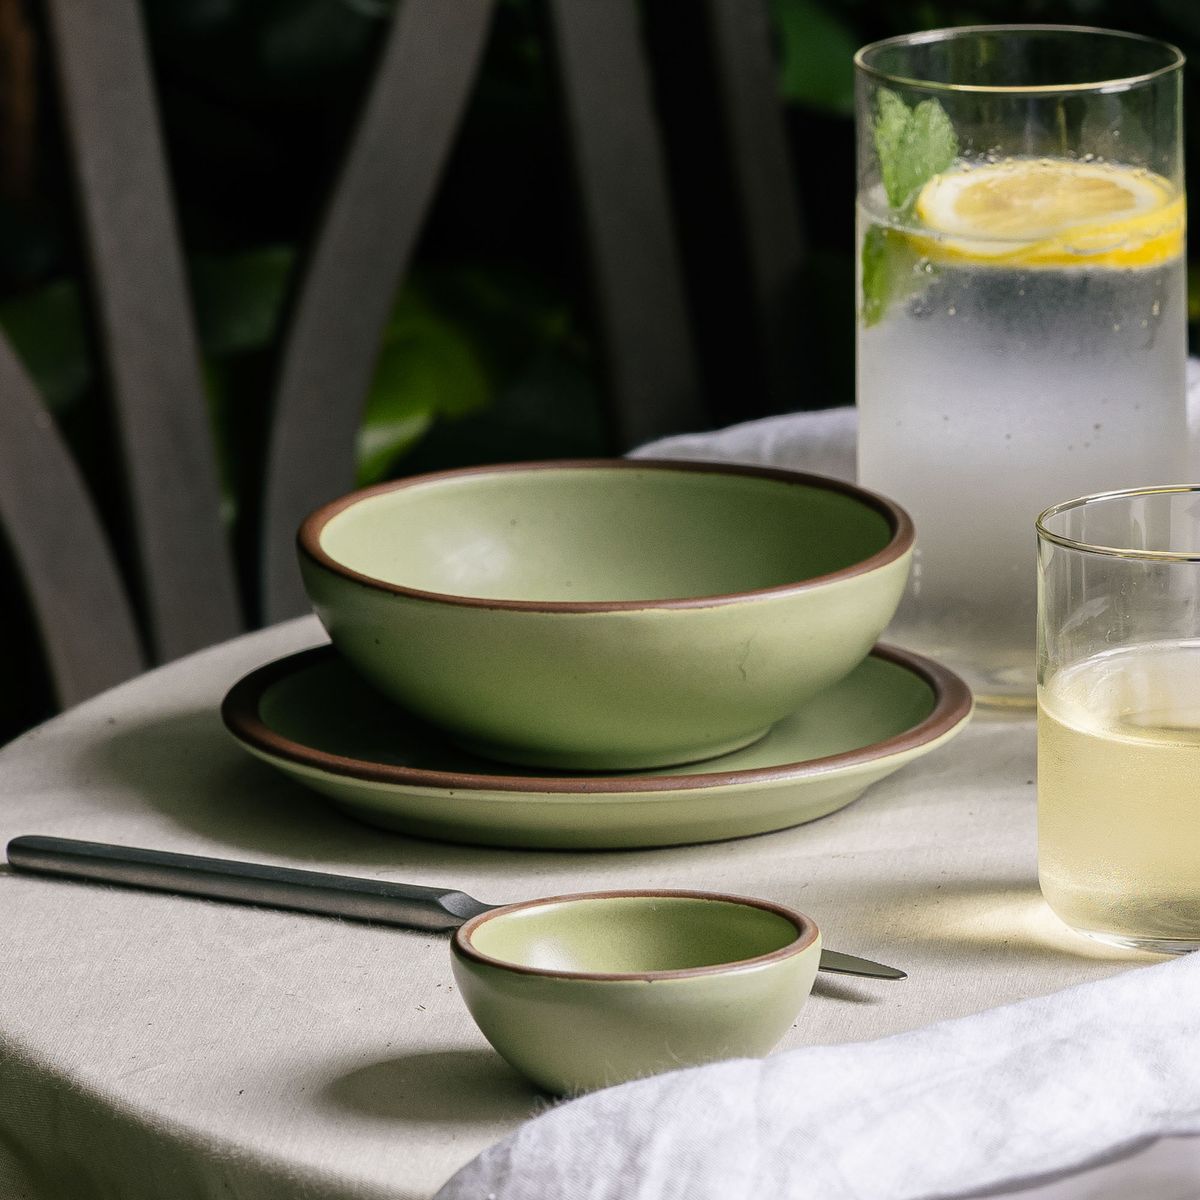 A shallow sage green bowl on a dessert-sized plate surrounded by a glass of water and a small glass of white wine.